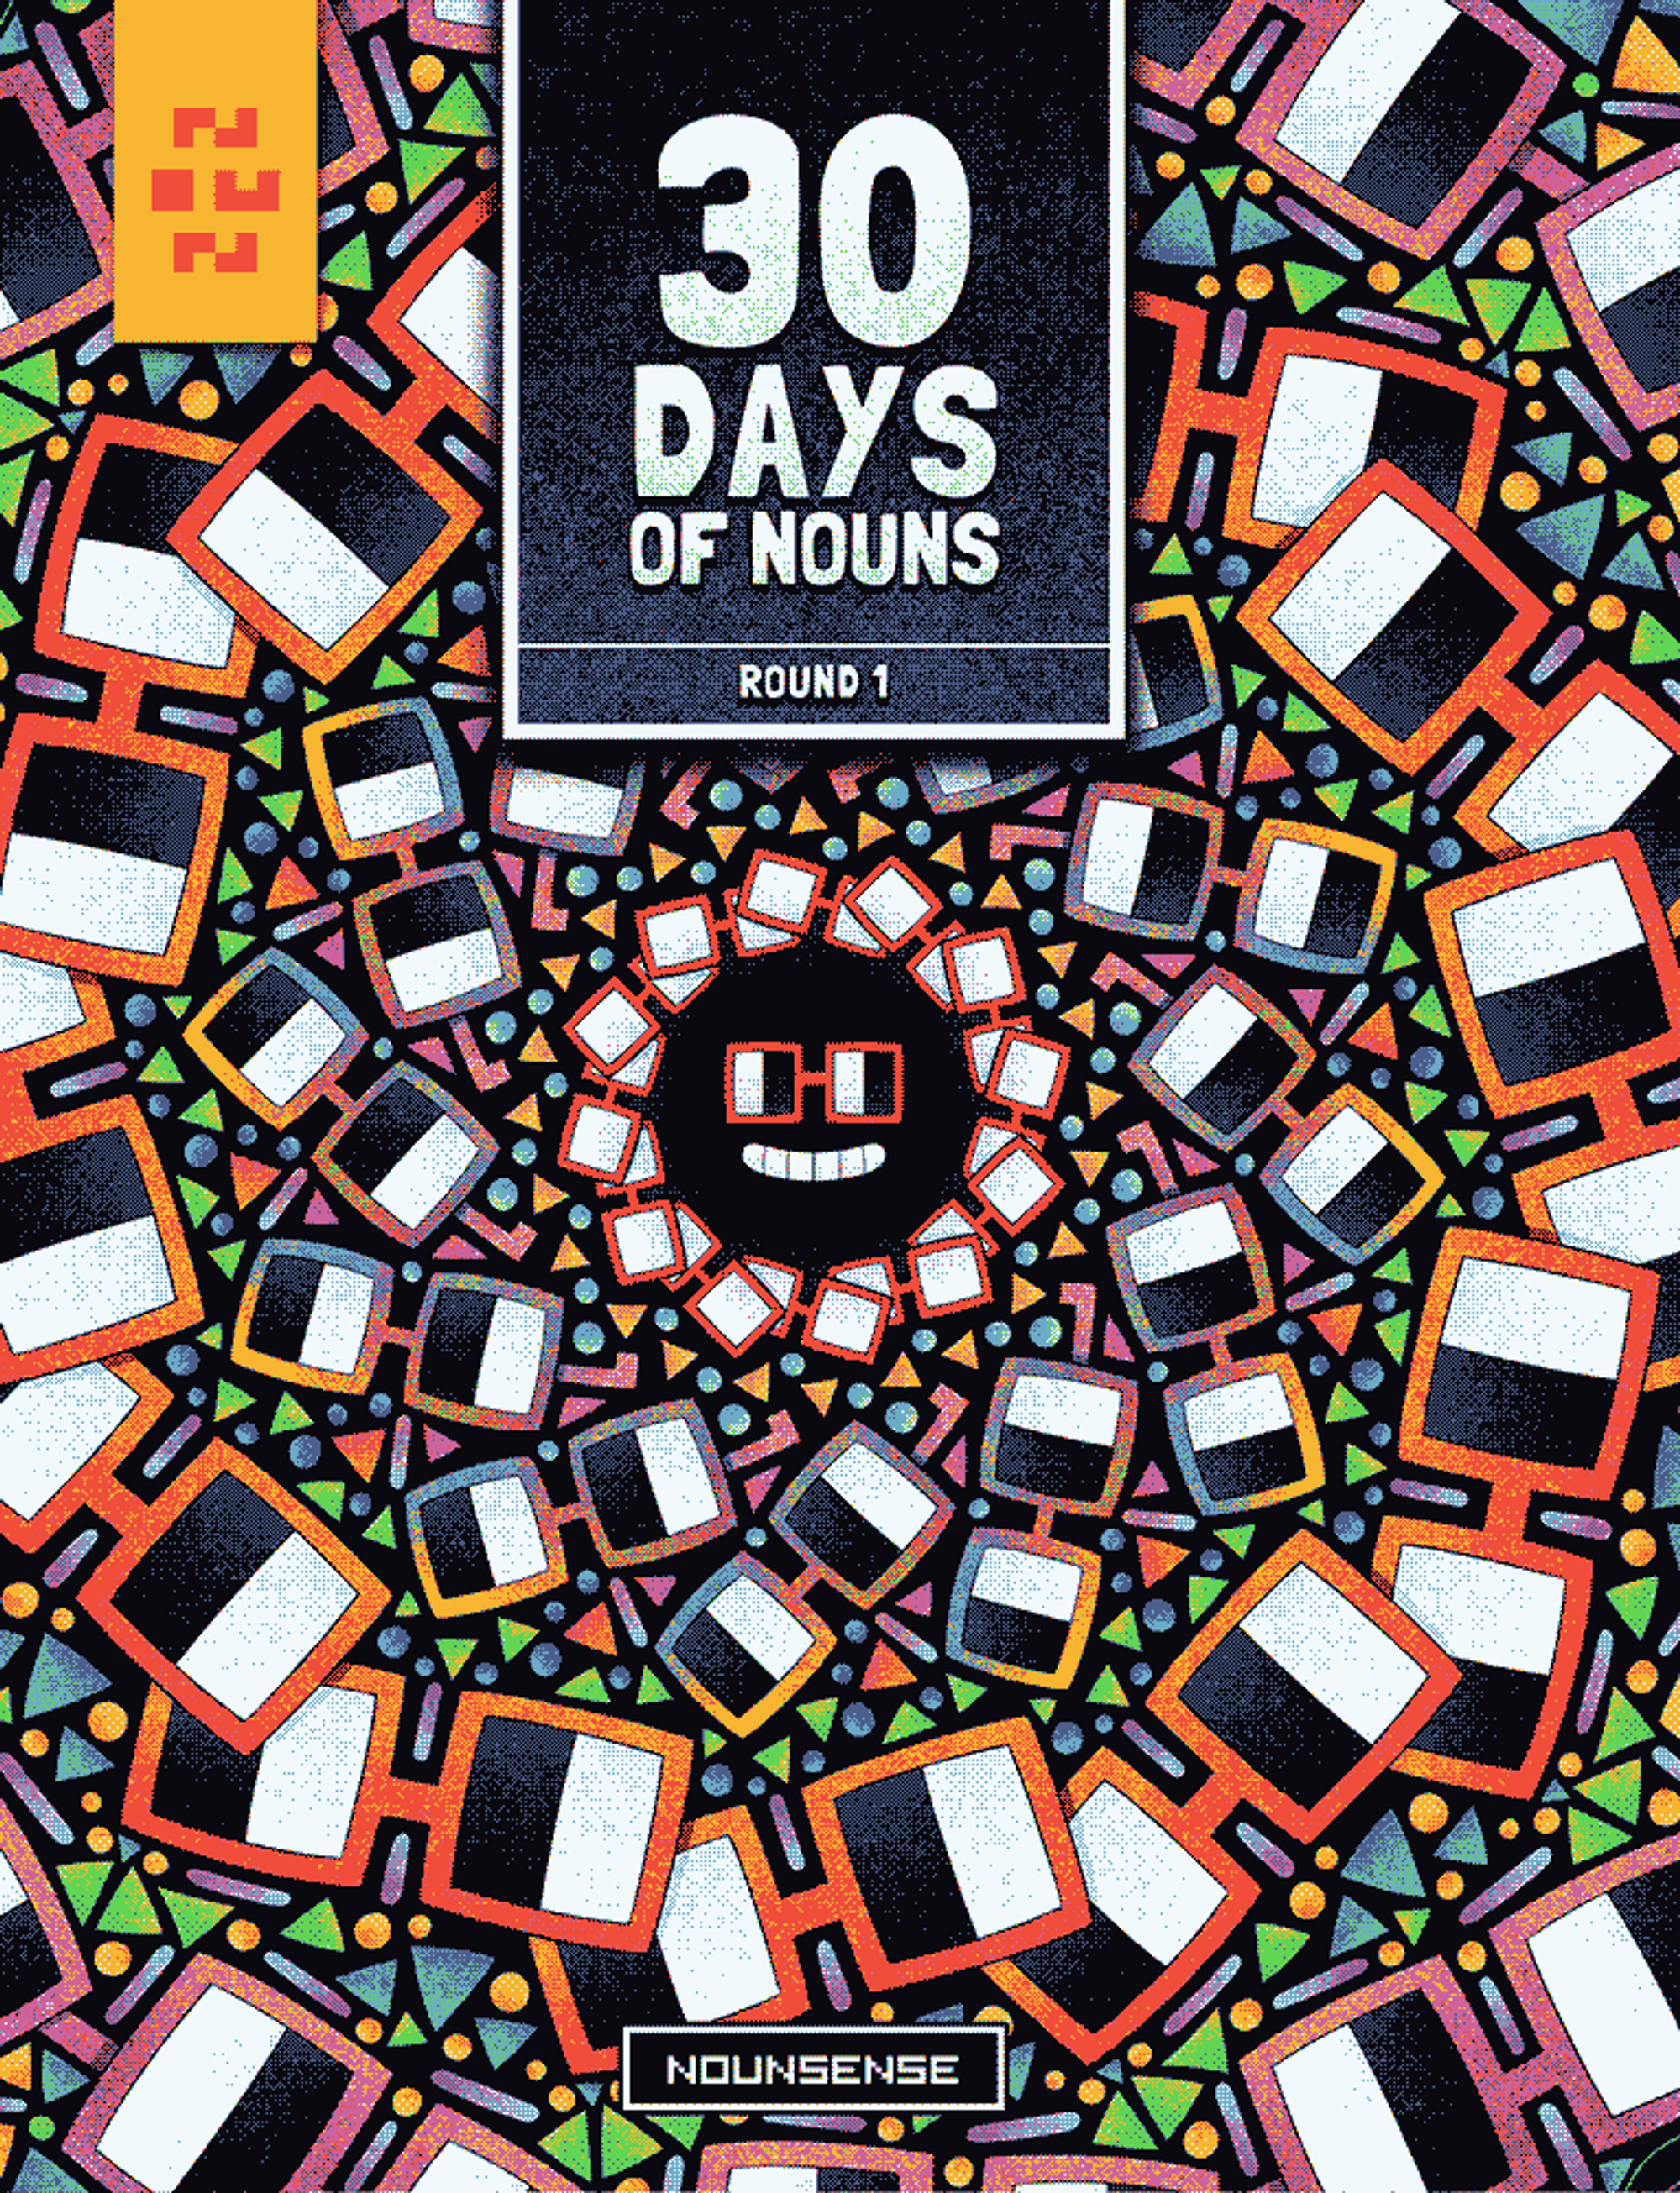 30-DAYS-OF-NOUNS-ROUND-1-BY-MESSHUP.png